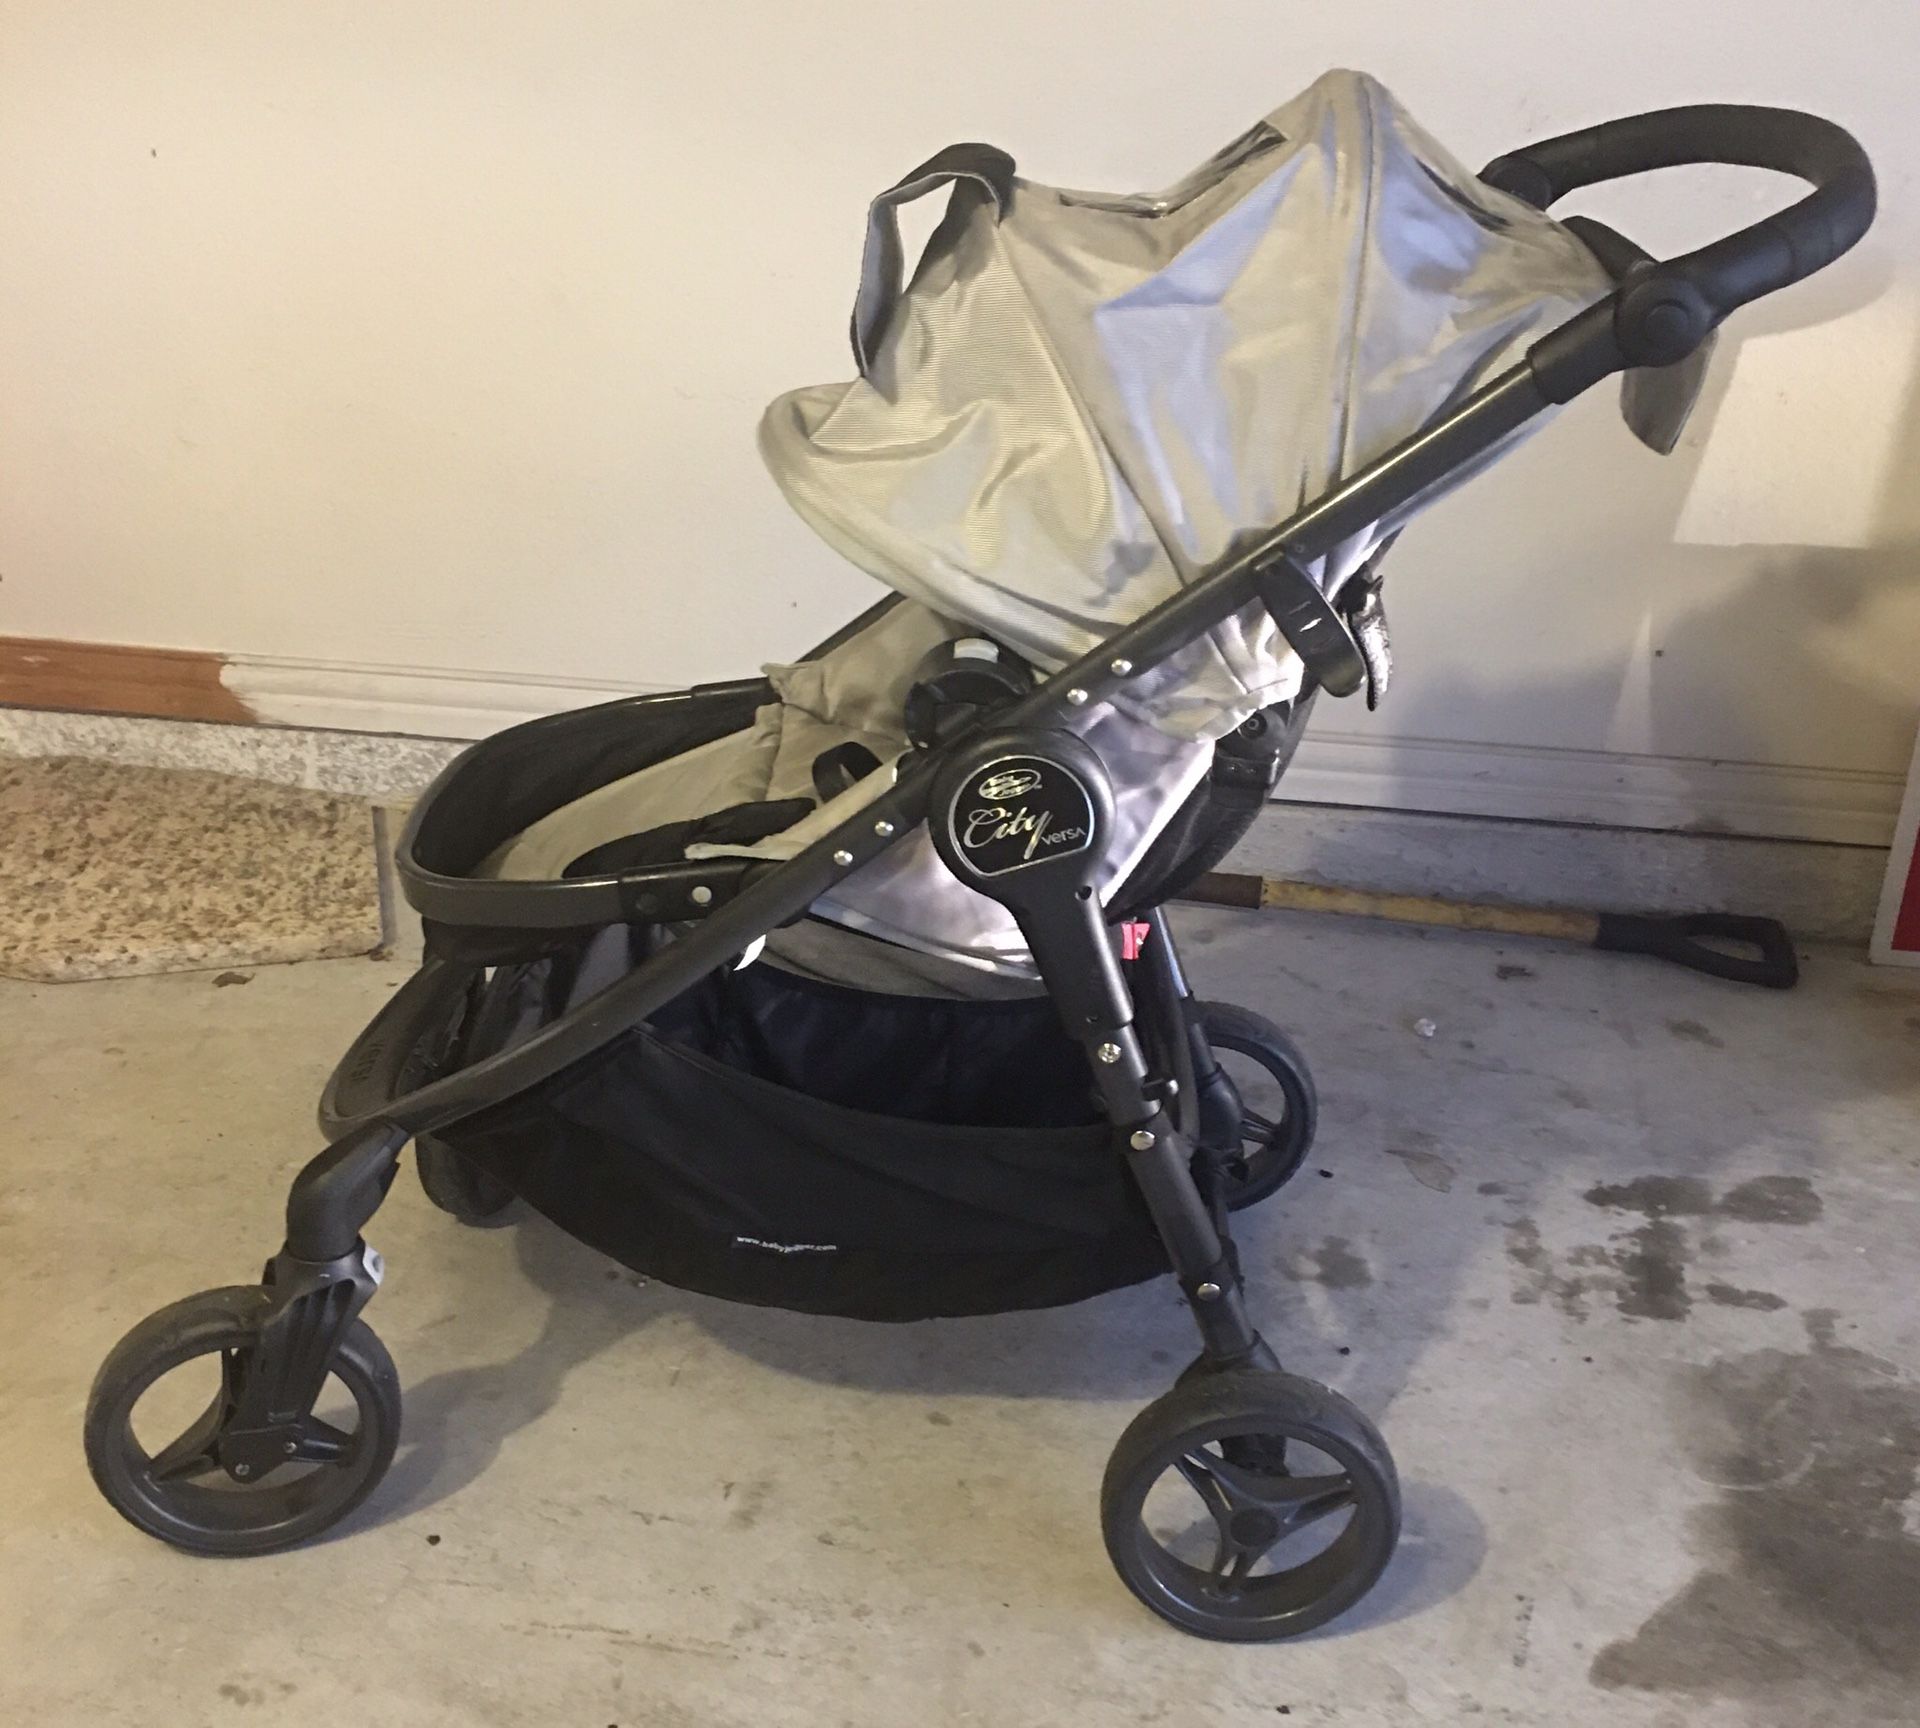 !!! Baby Jogger City Versa stroller for kids and baby!!!